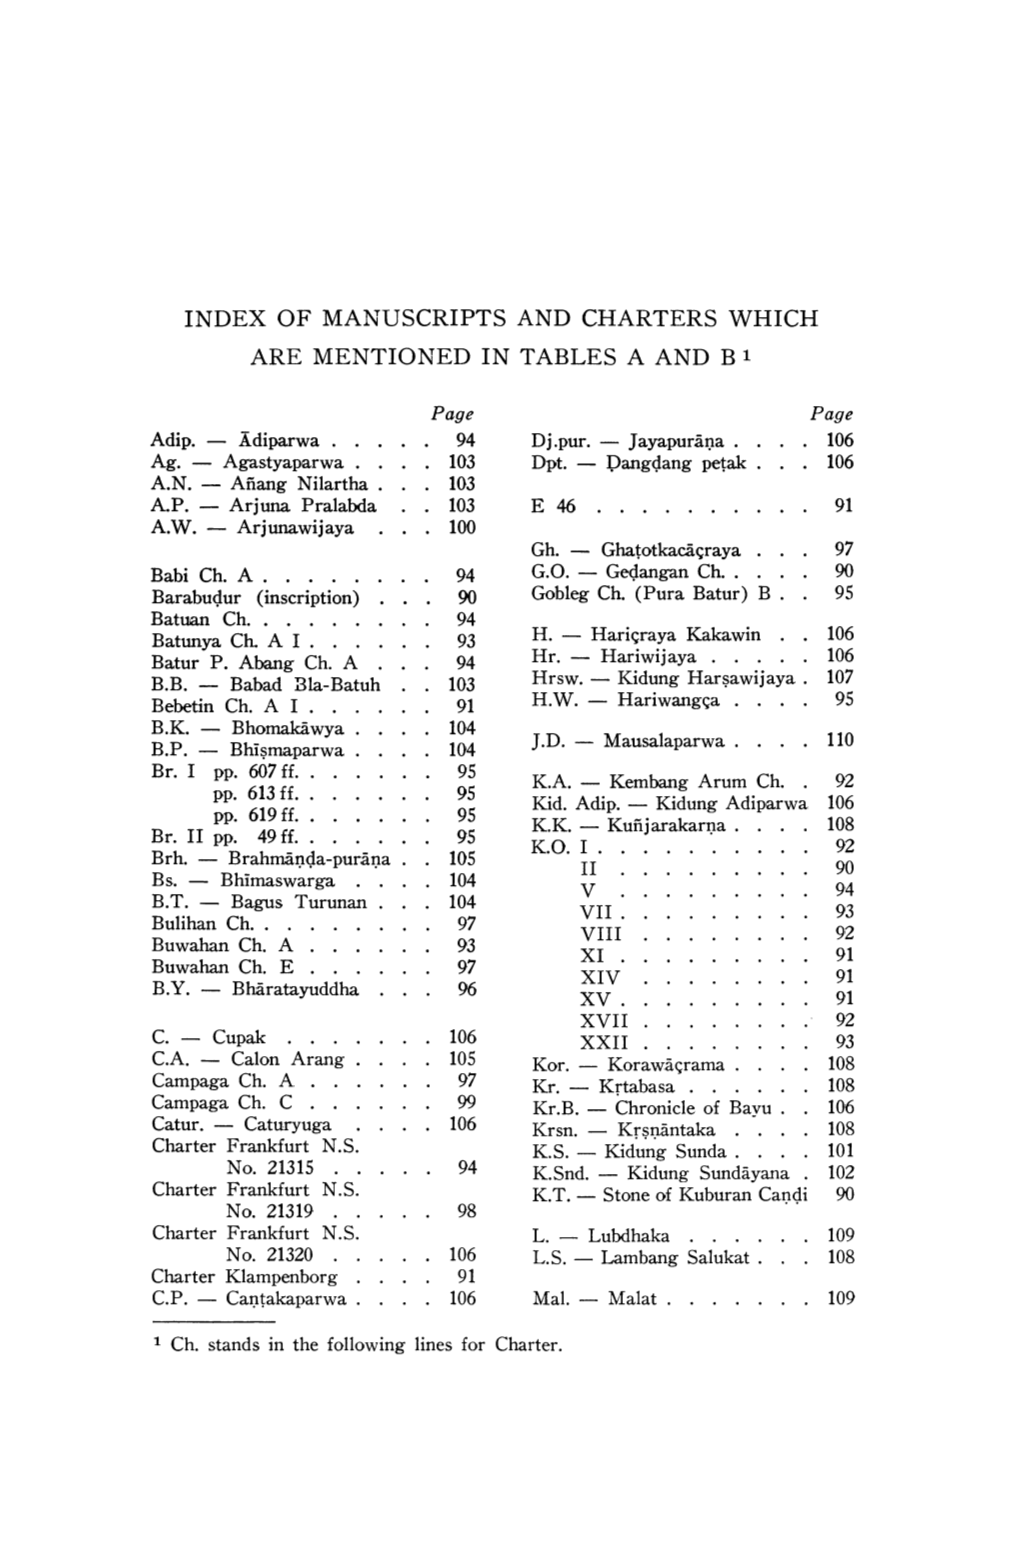 Of Manuscripts and Charters Which Are Mentioned In